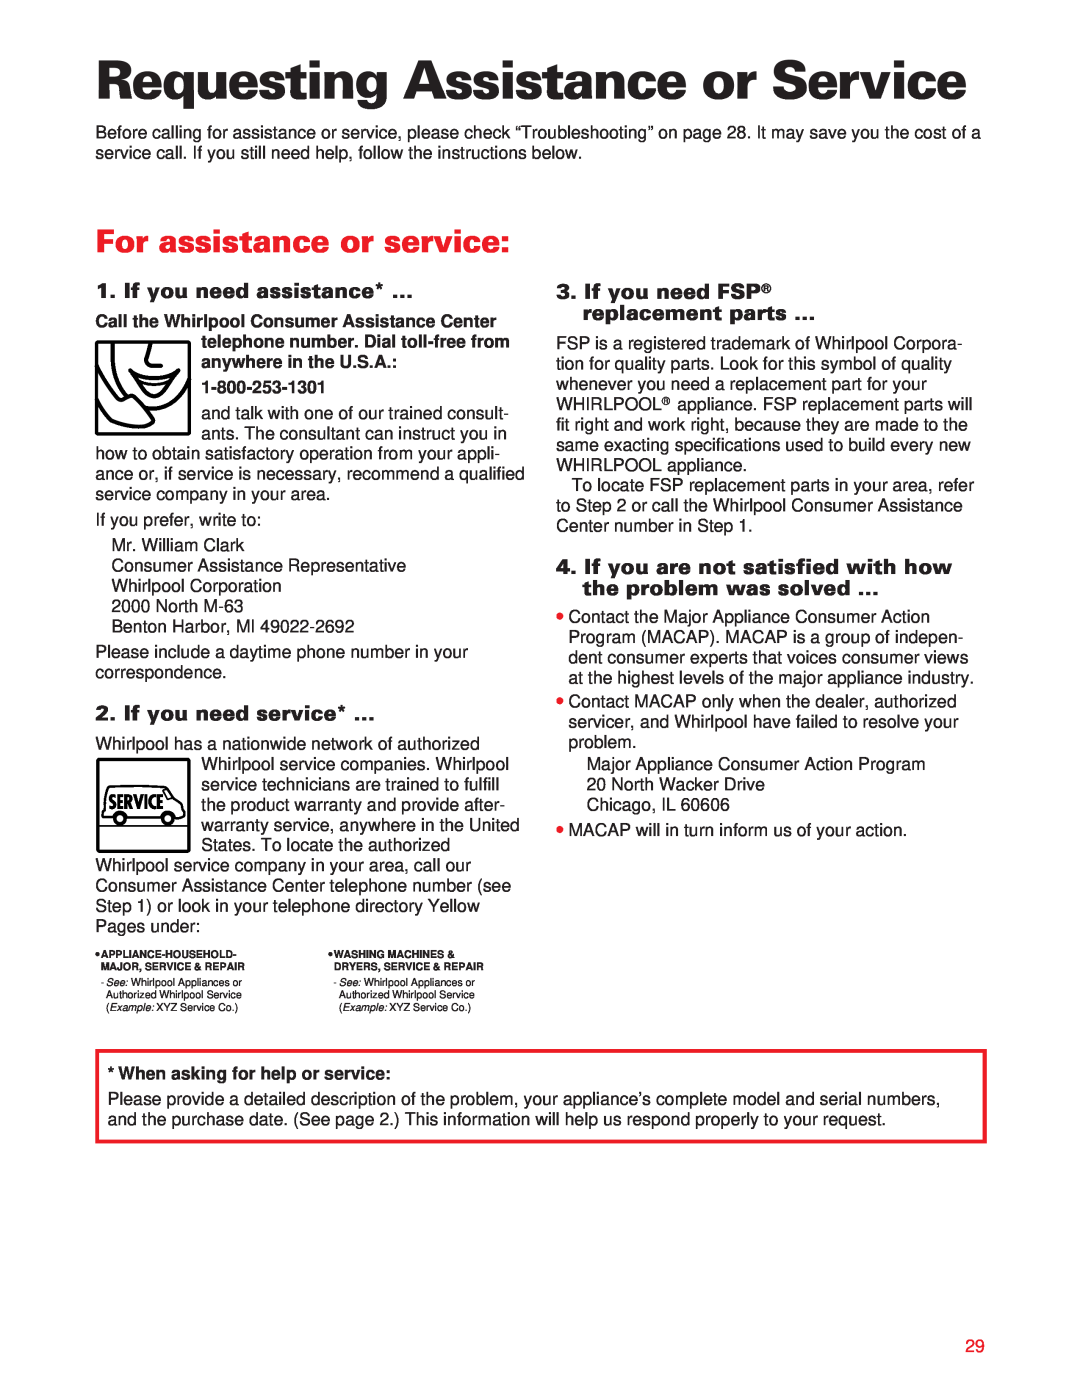 Whirlpool ED20DFXEB00 warranty Requesting Assistance or Service, For assistance or service, If you need assistance* … 